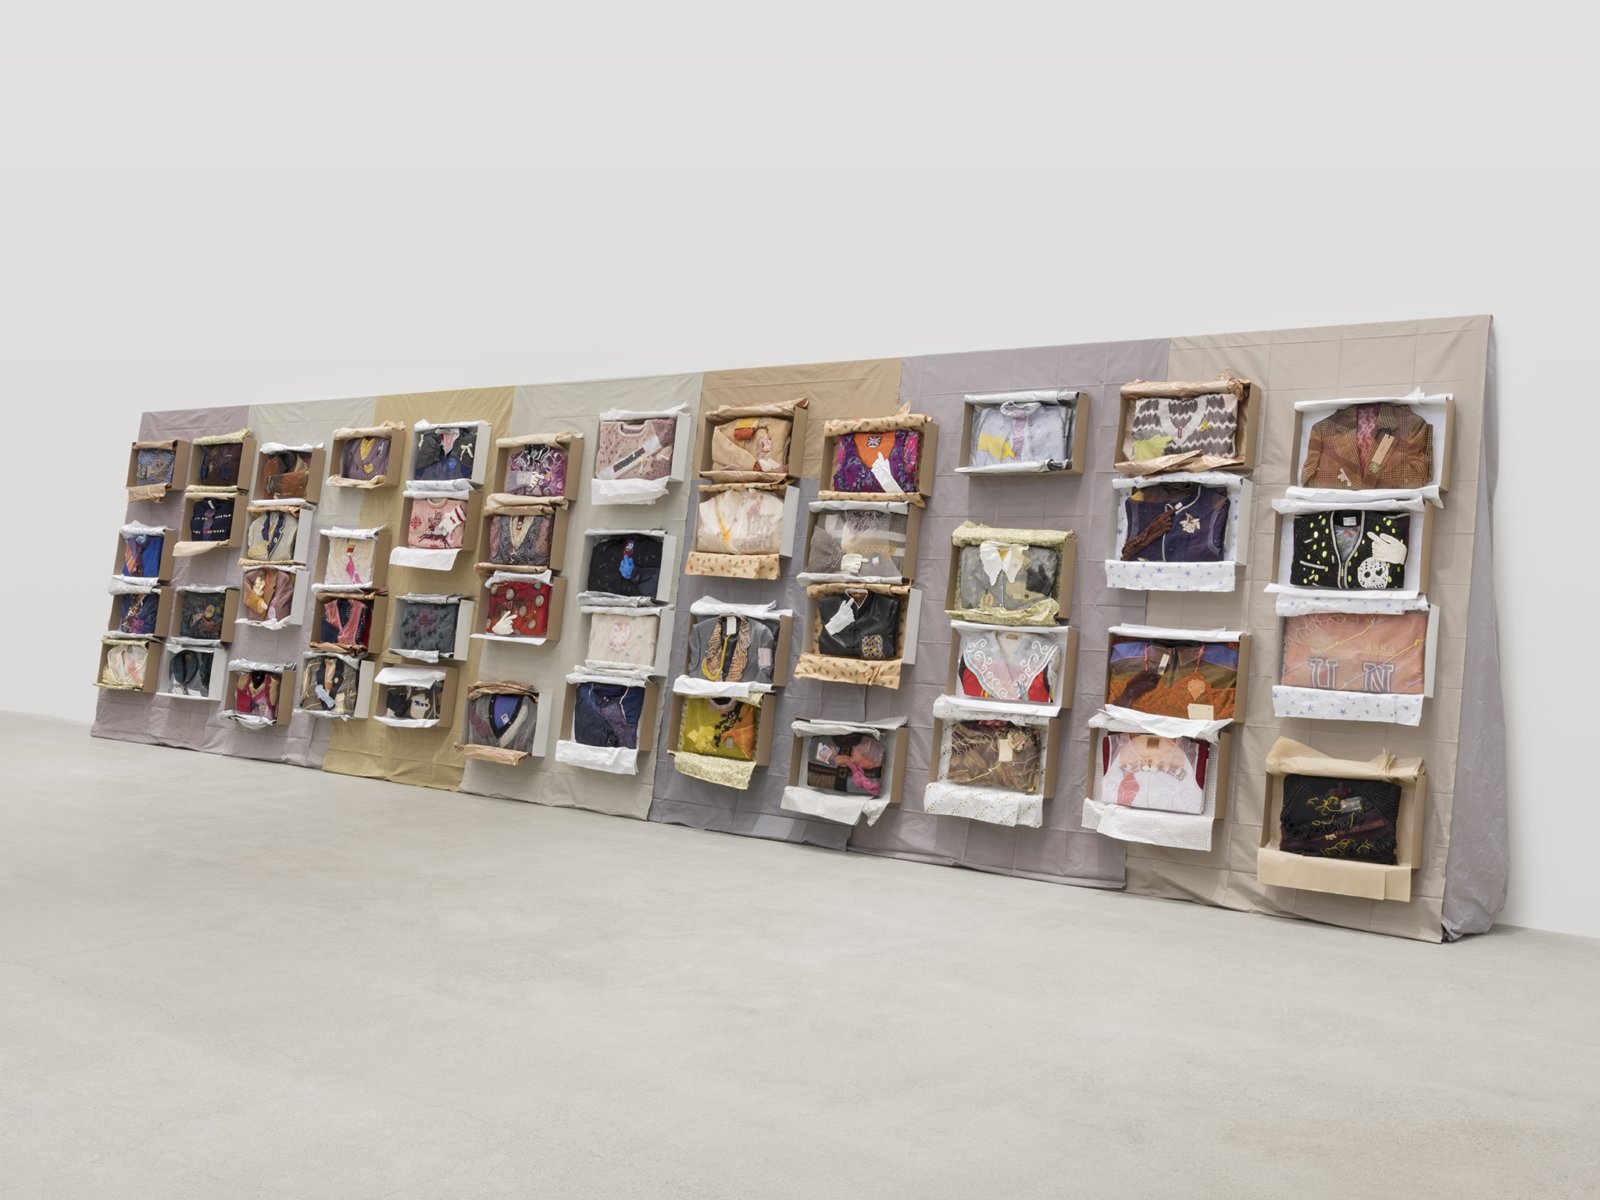 Liz Magor, Being This, 2012–2019, paper, textiles, found materials, 96 x 432 x 22 in. (244 x 1097 x 56 cm)